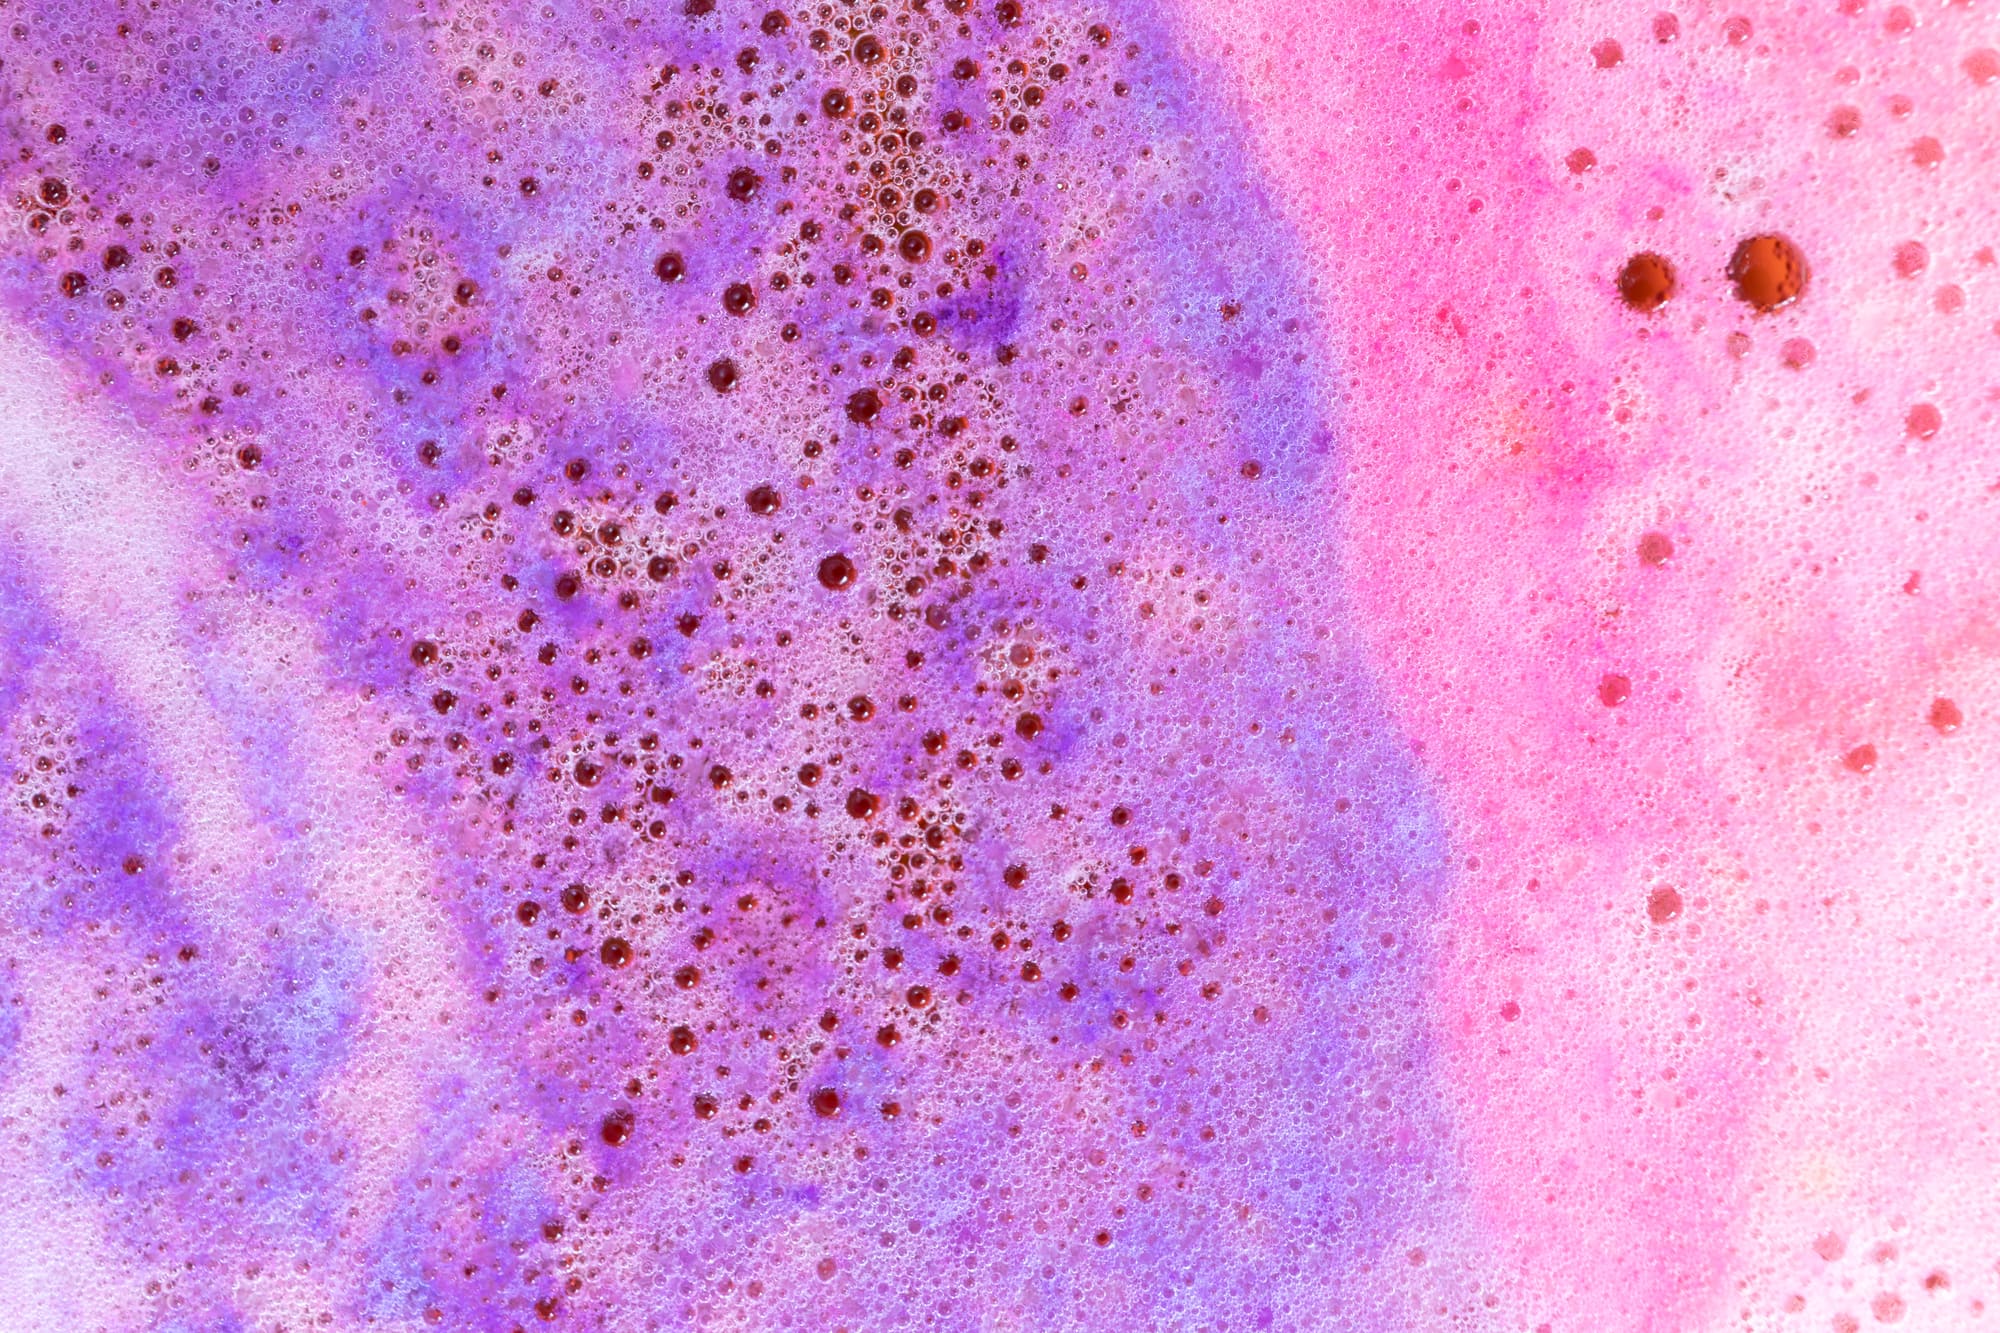 How to Remove Bath Bomb Stains from Skin?